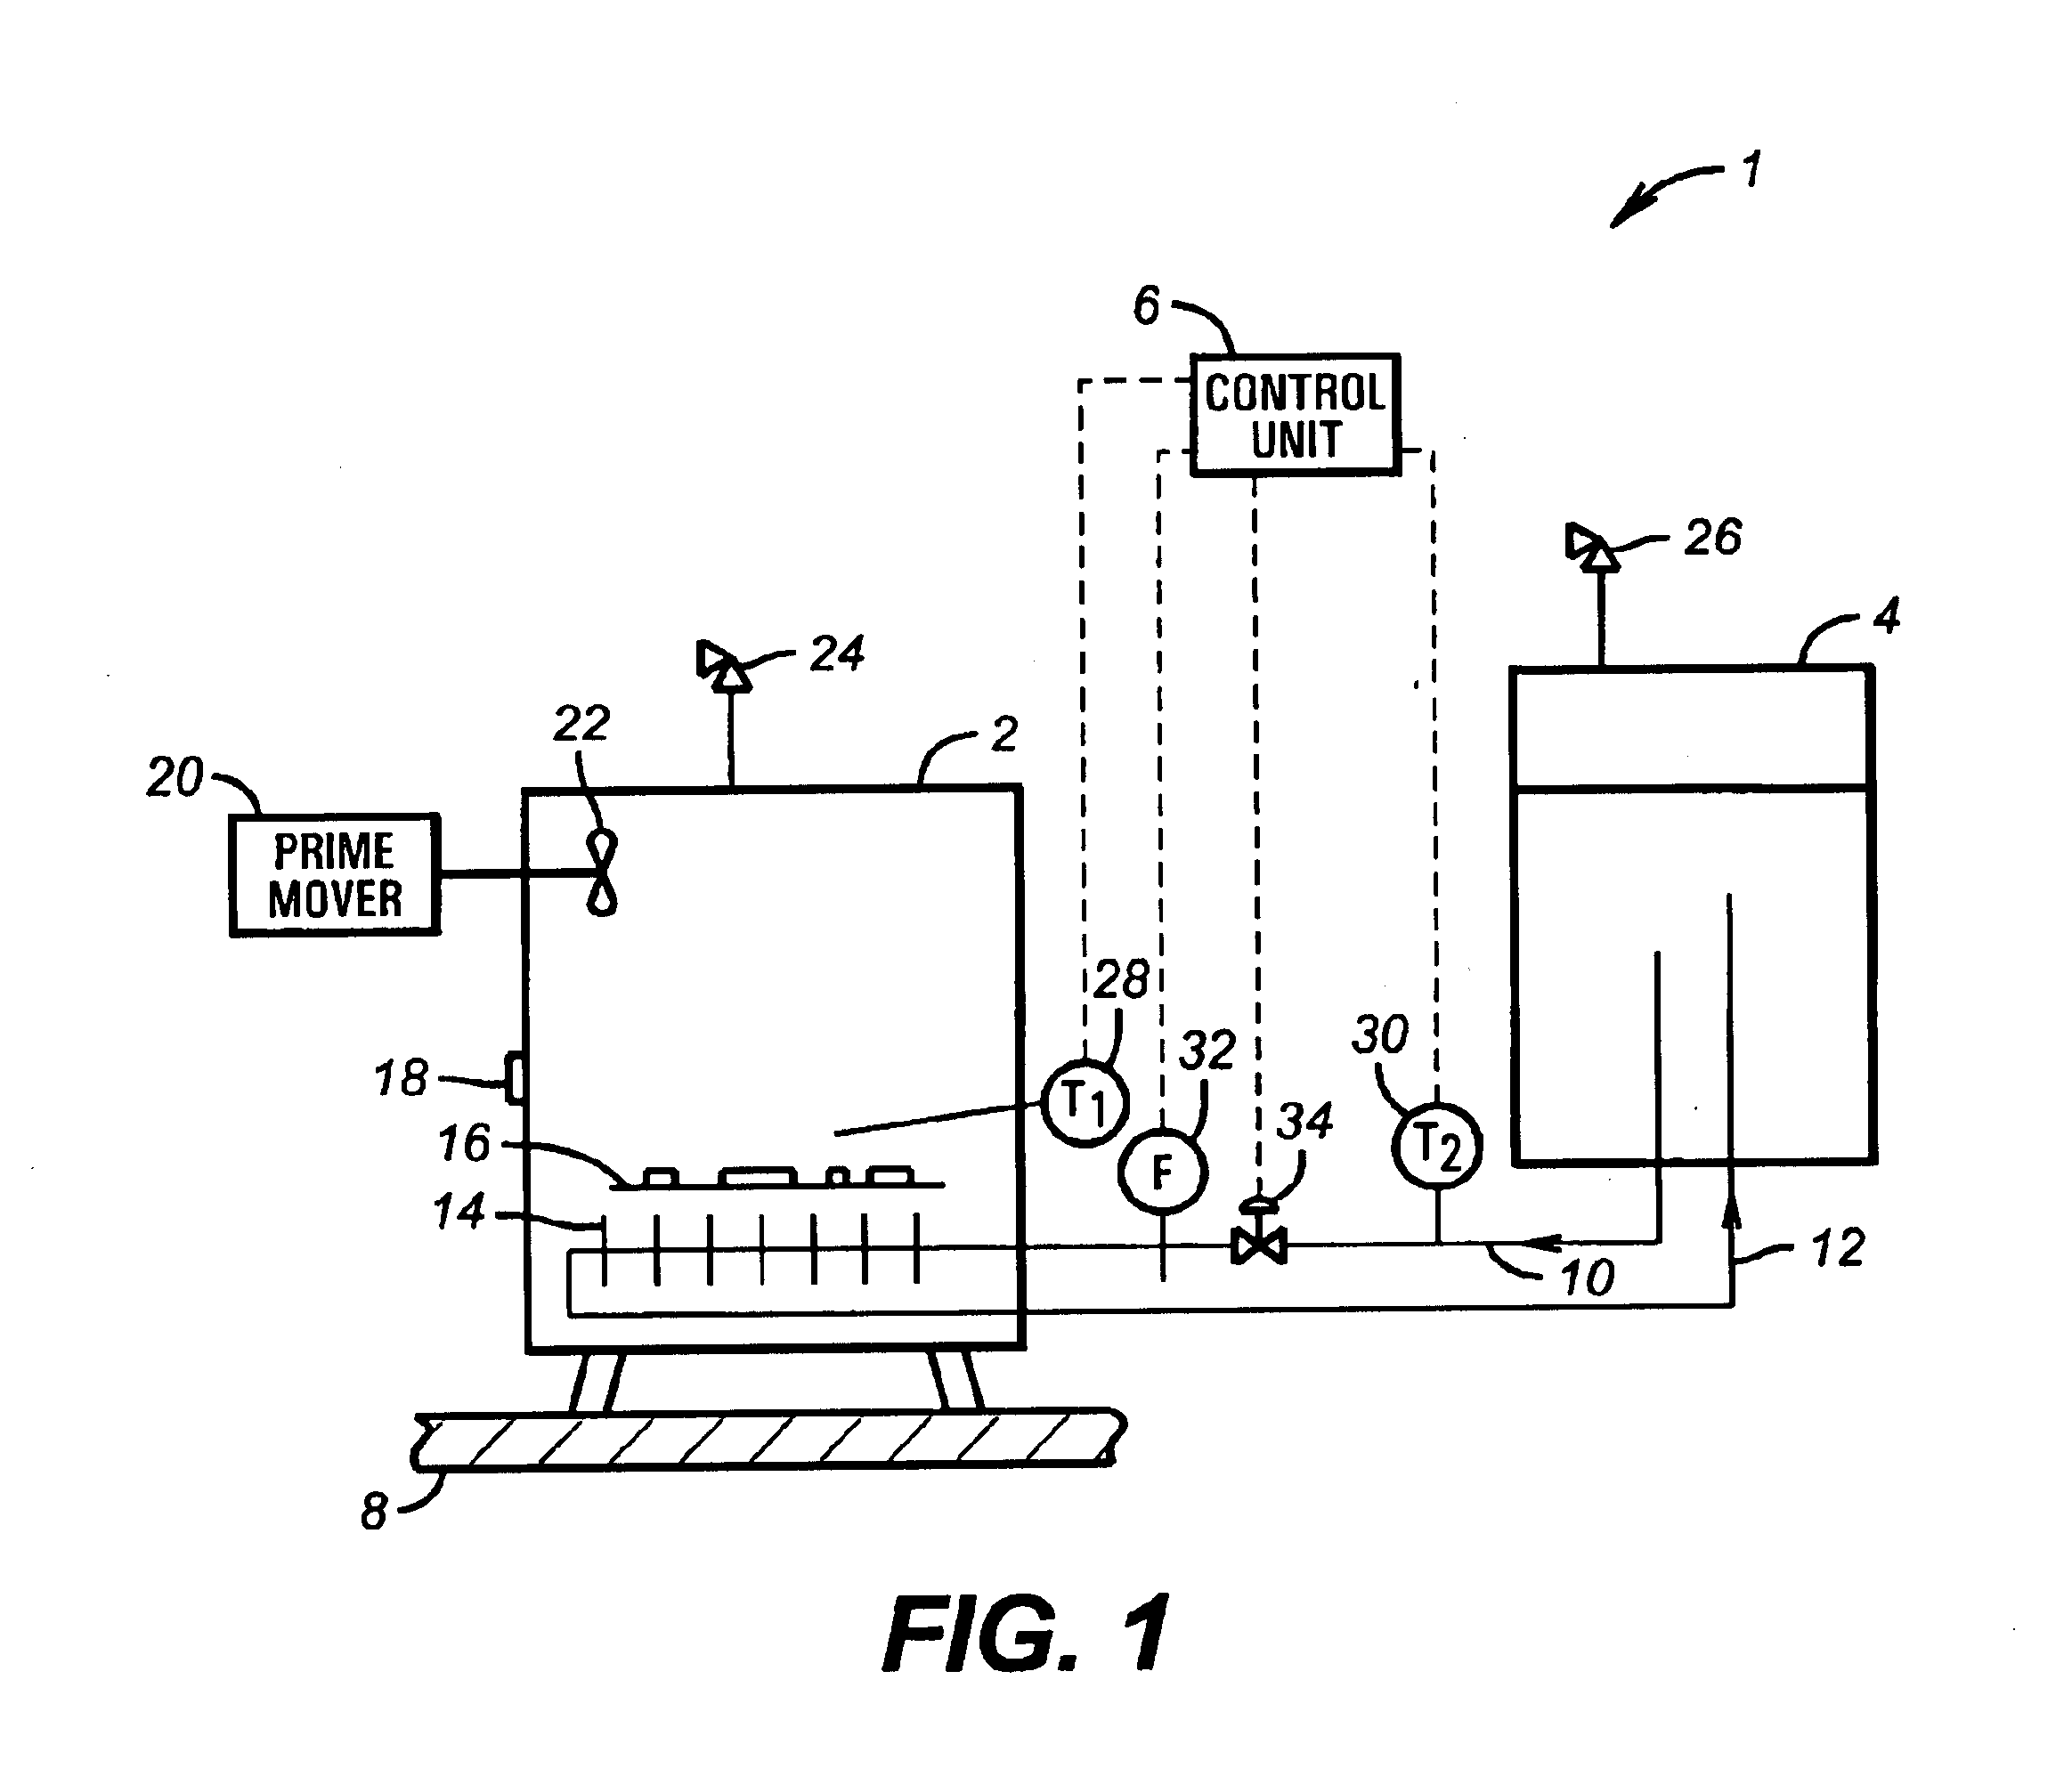 Methods and apparatus for recycling cryogenic liquid or gas from test chambers